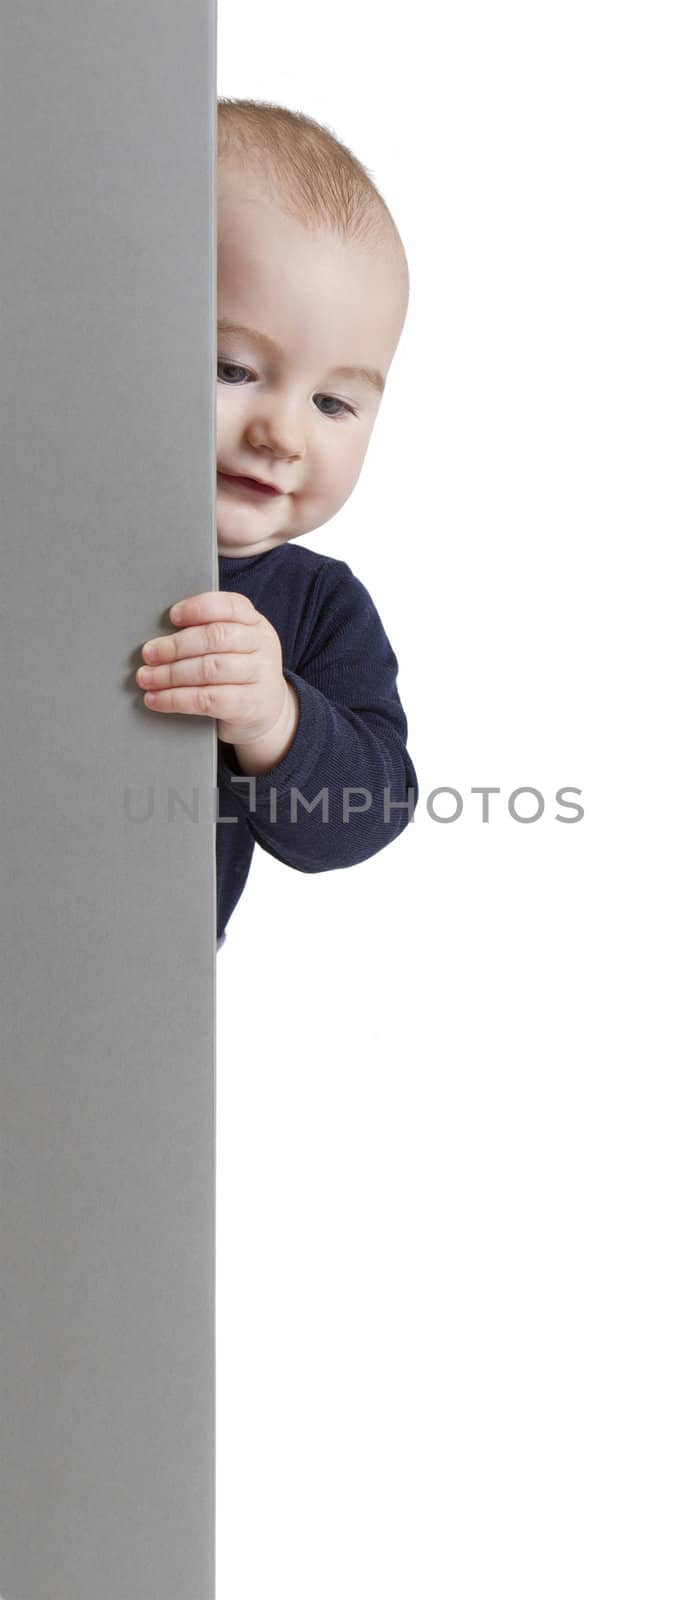 young child holding vertical sign by gewoldi